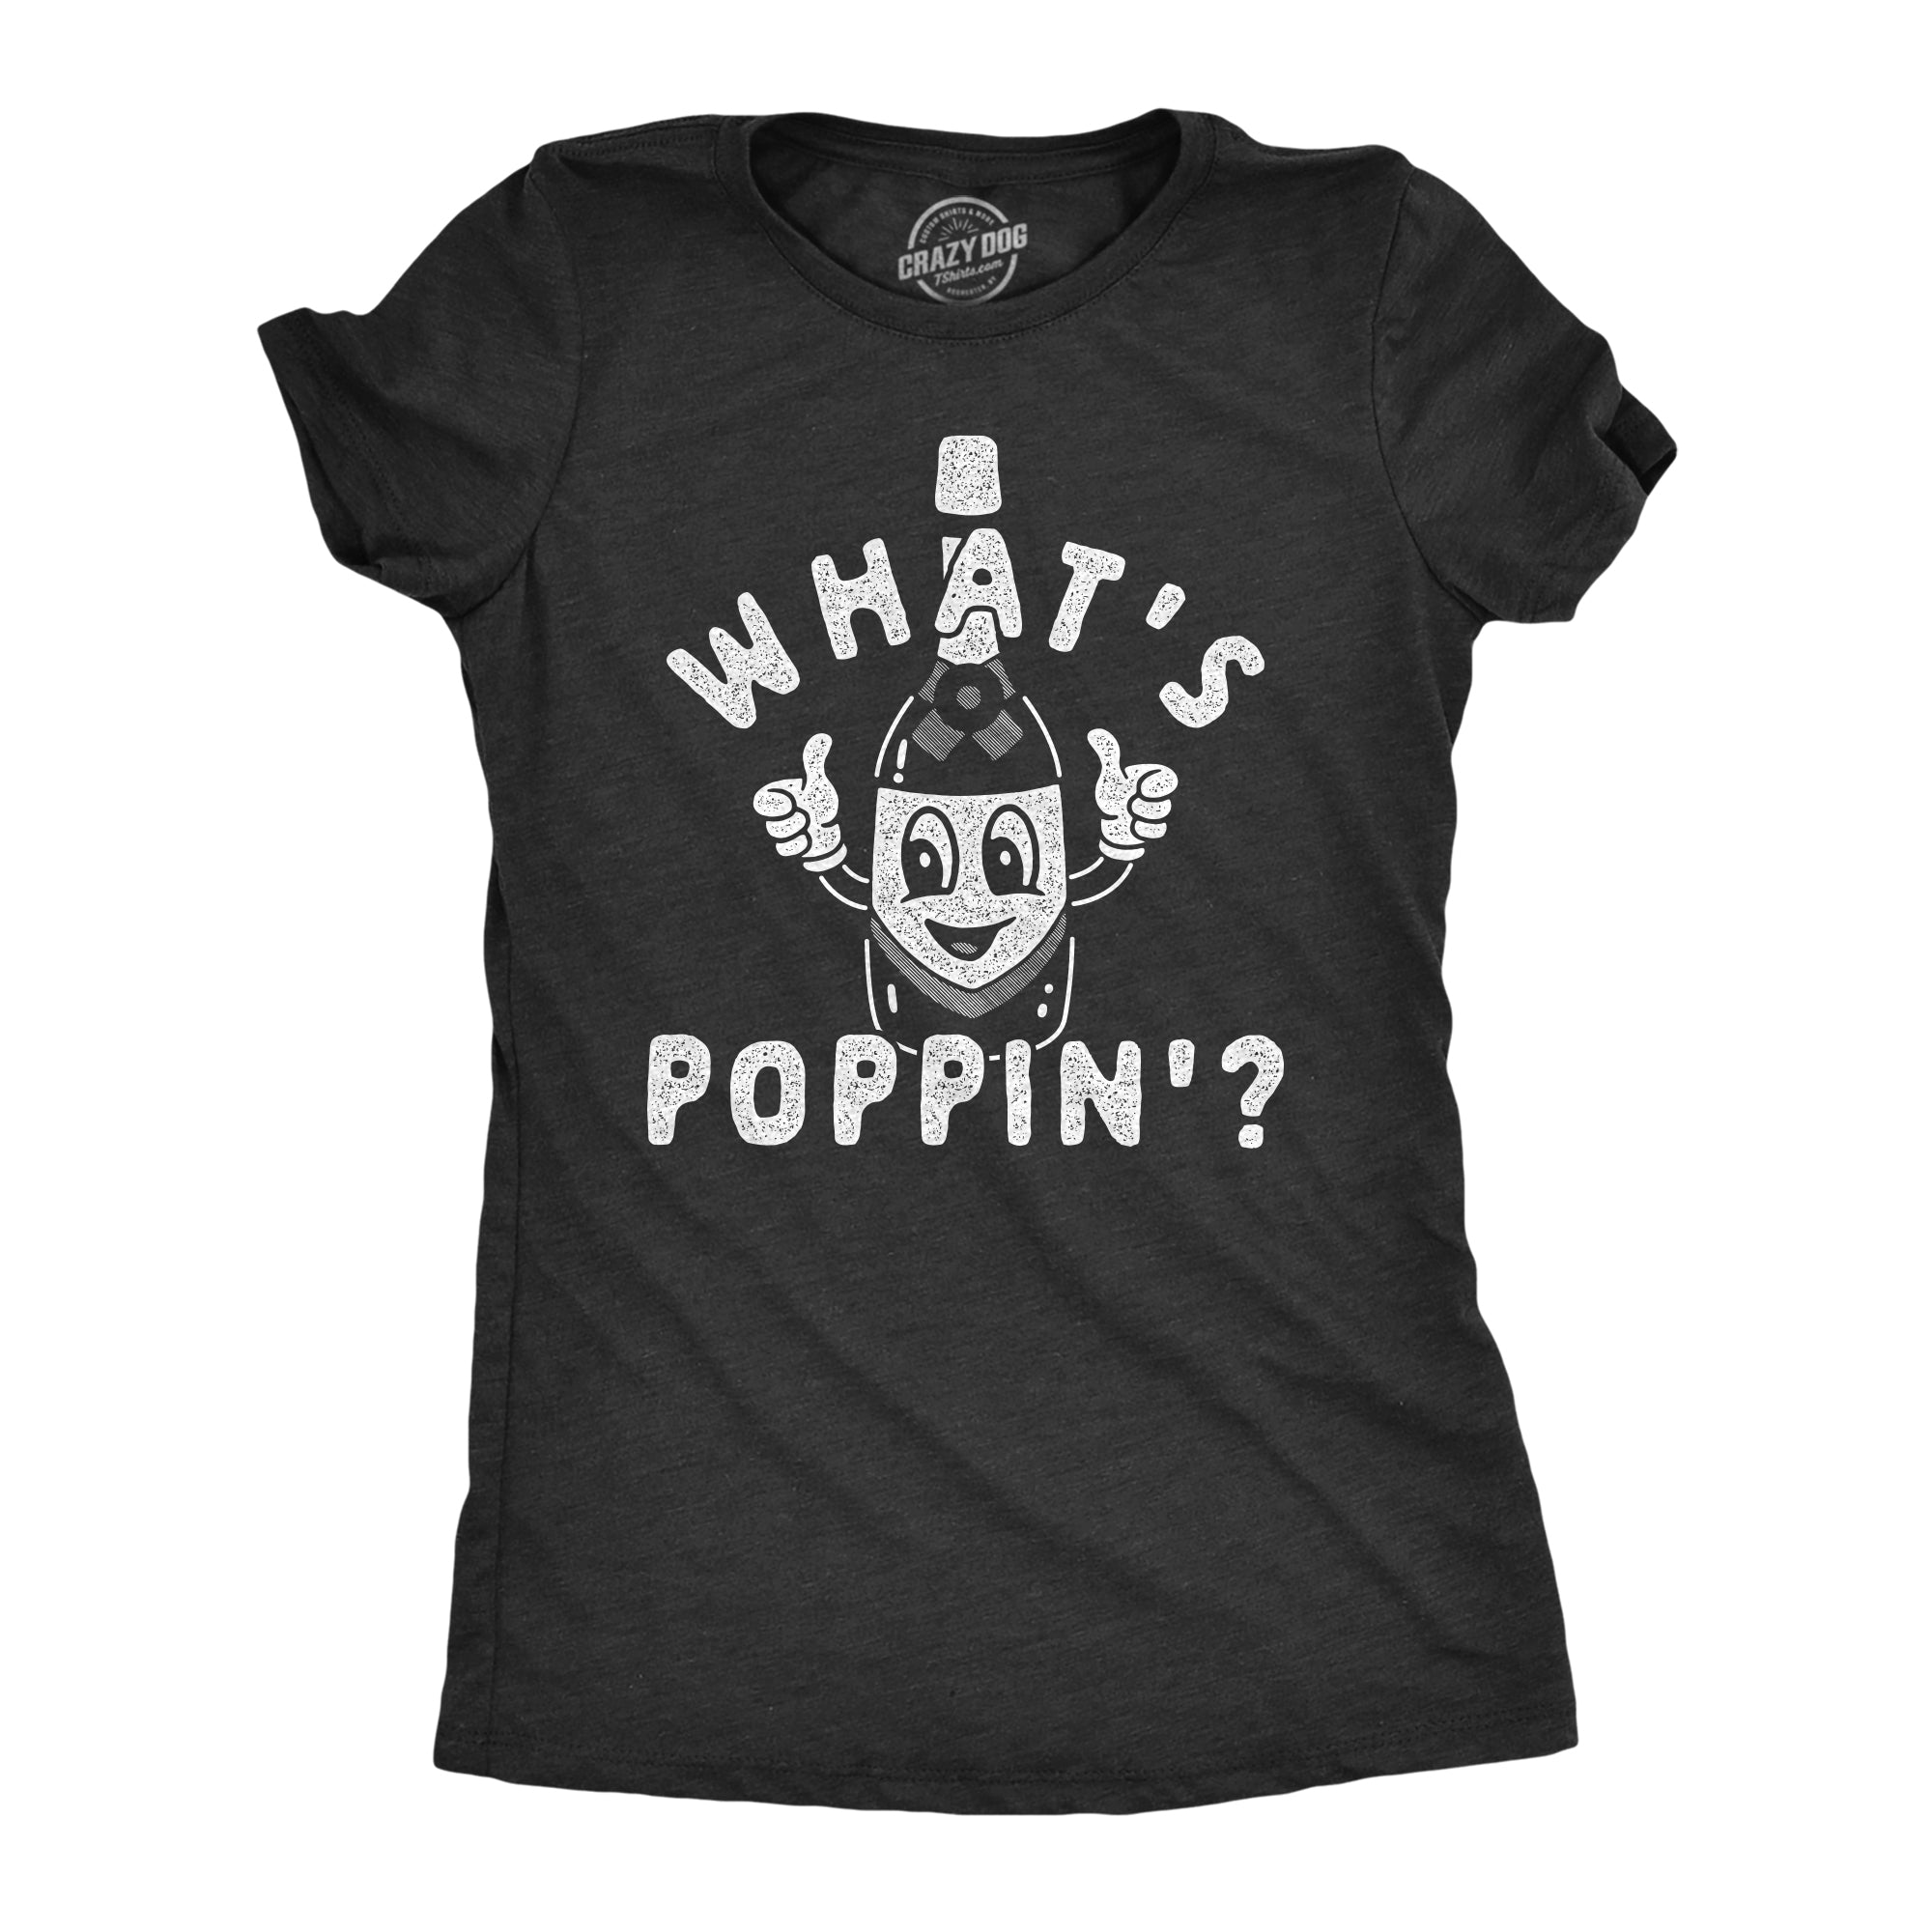 Funny Heather Black - Whats Poppin Whats Poppin Womens T Shirt Nerdy New Years Drinking Tee